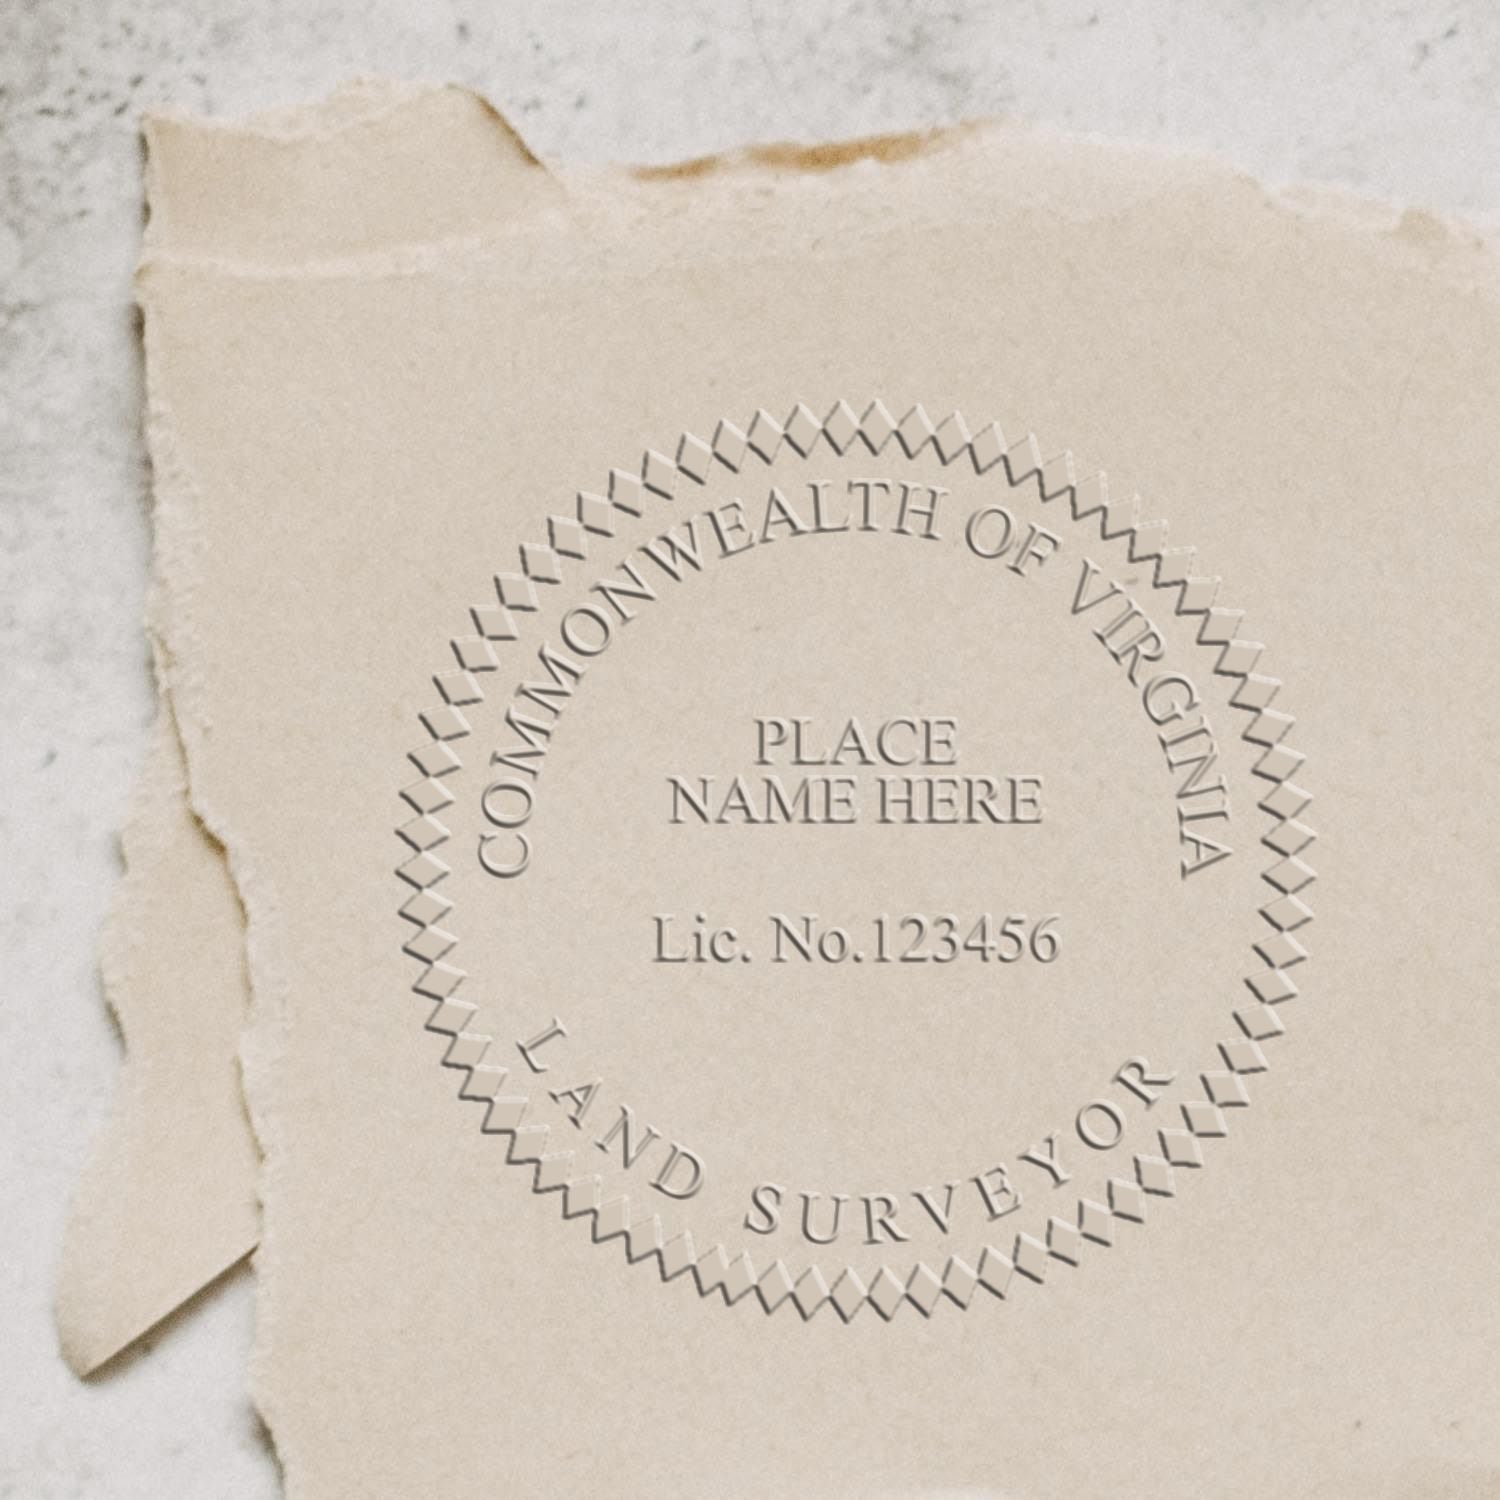 A lifestyle photo showing a stamped image of the Handheld Virginia Land Surveyor Seal on a piece of paper